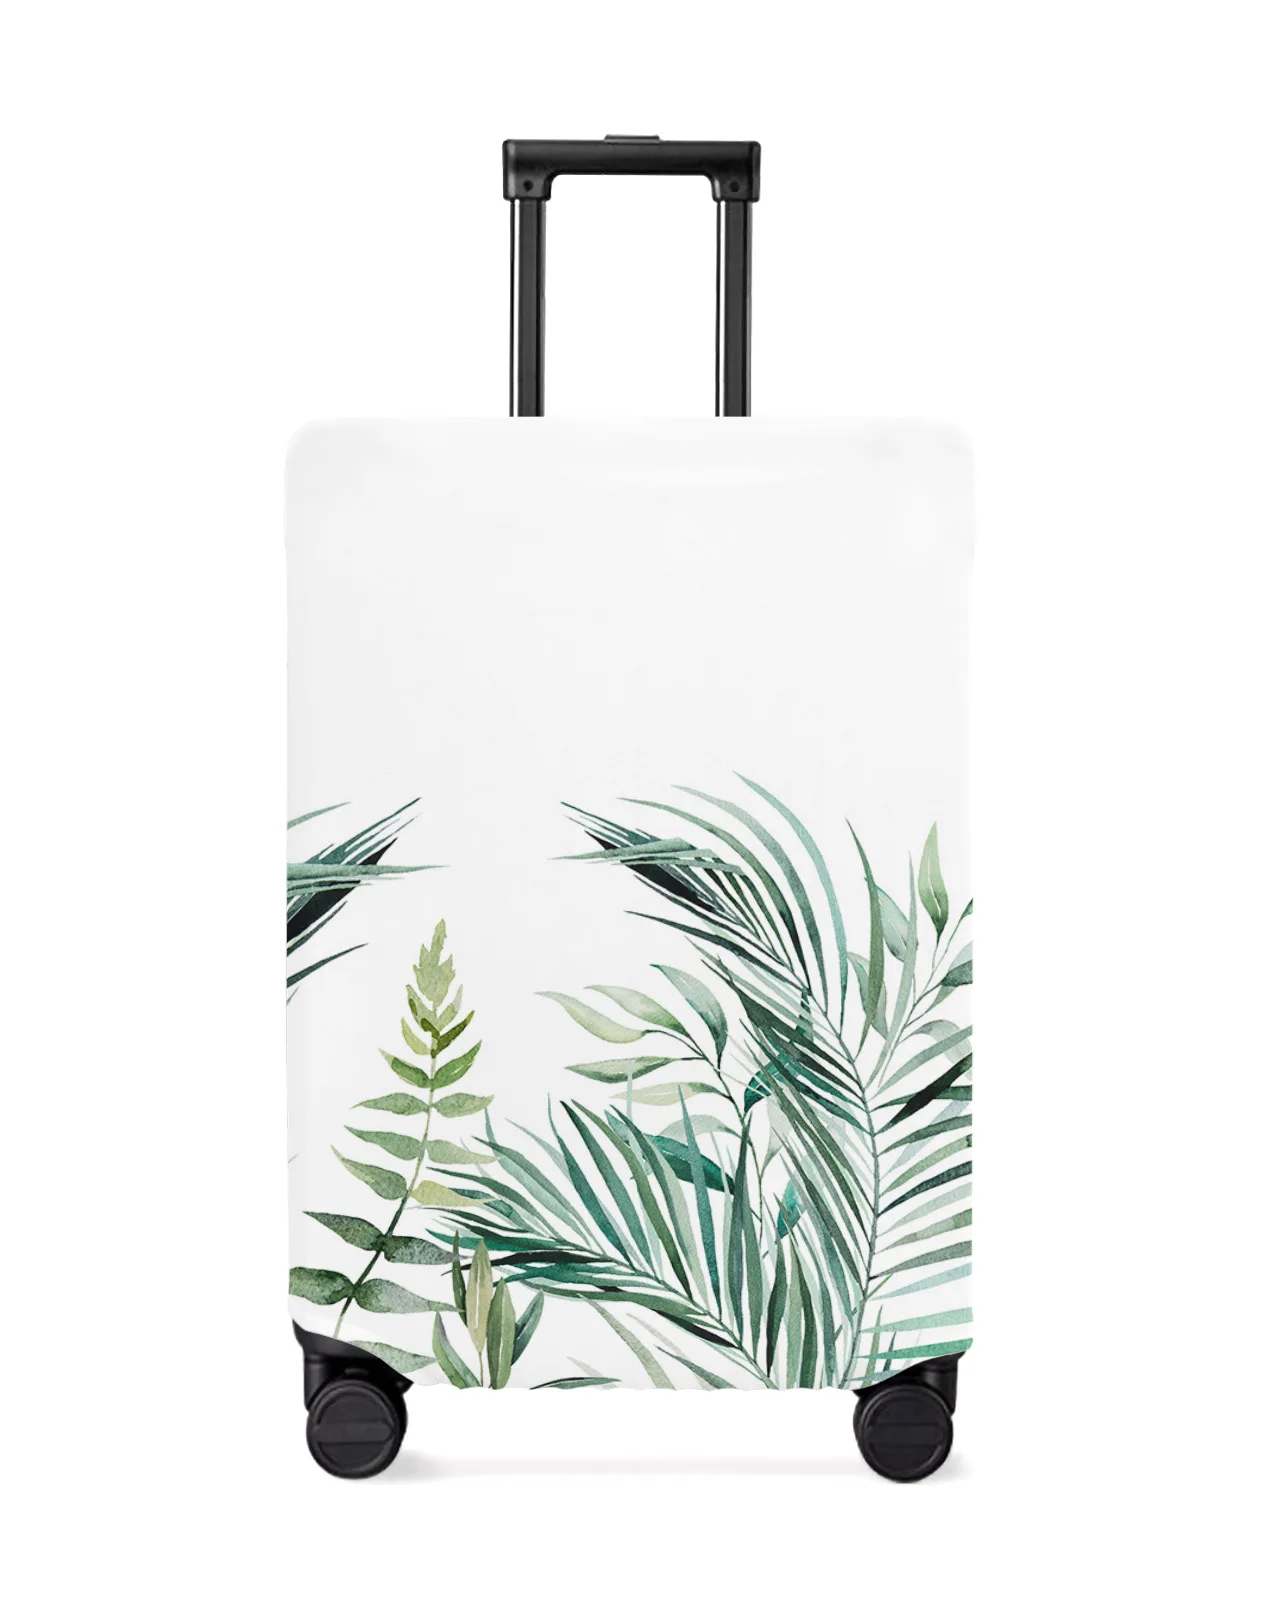 

Idyllic Tropical Plants Palm Leaves Travel Luggage Cover Elastic Baggage Cover Suitcase Case Dust Cover Travel Accessories